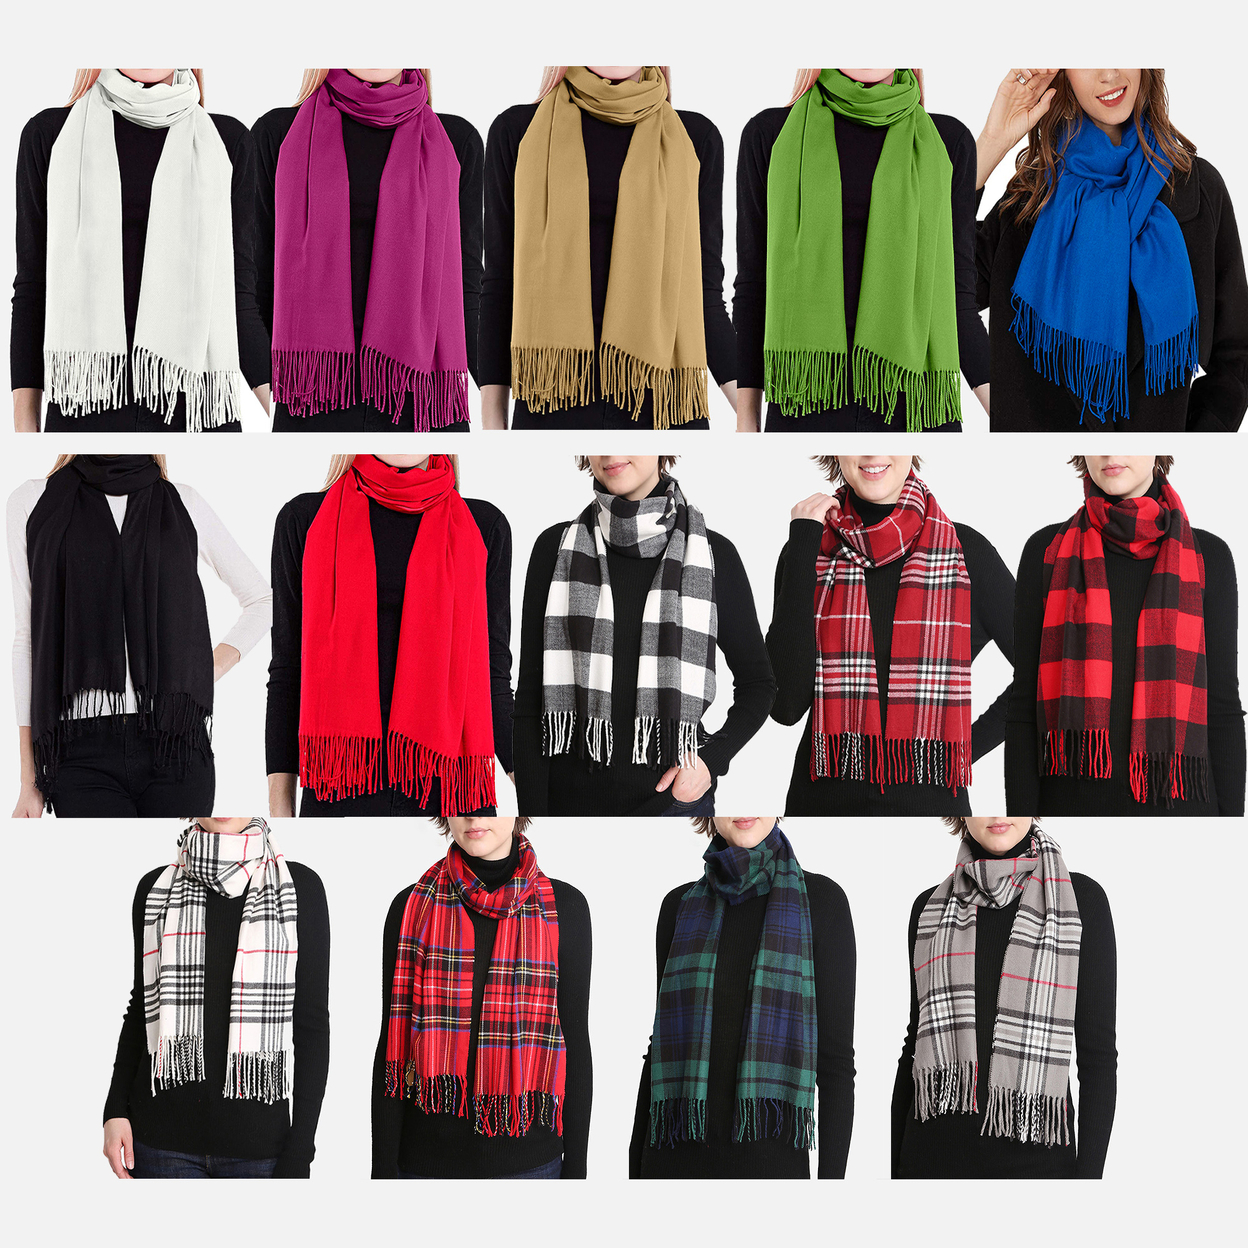 4-Pack: Women's Ultra Soft Solid & Plaid Cashmere Feel Winter Warm Scarfs - Solid & Plaid